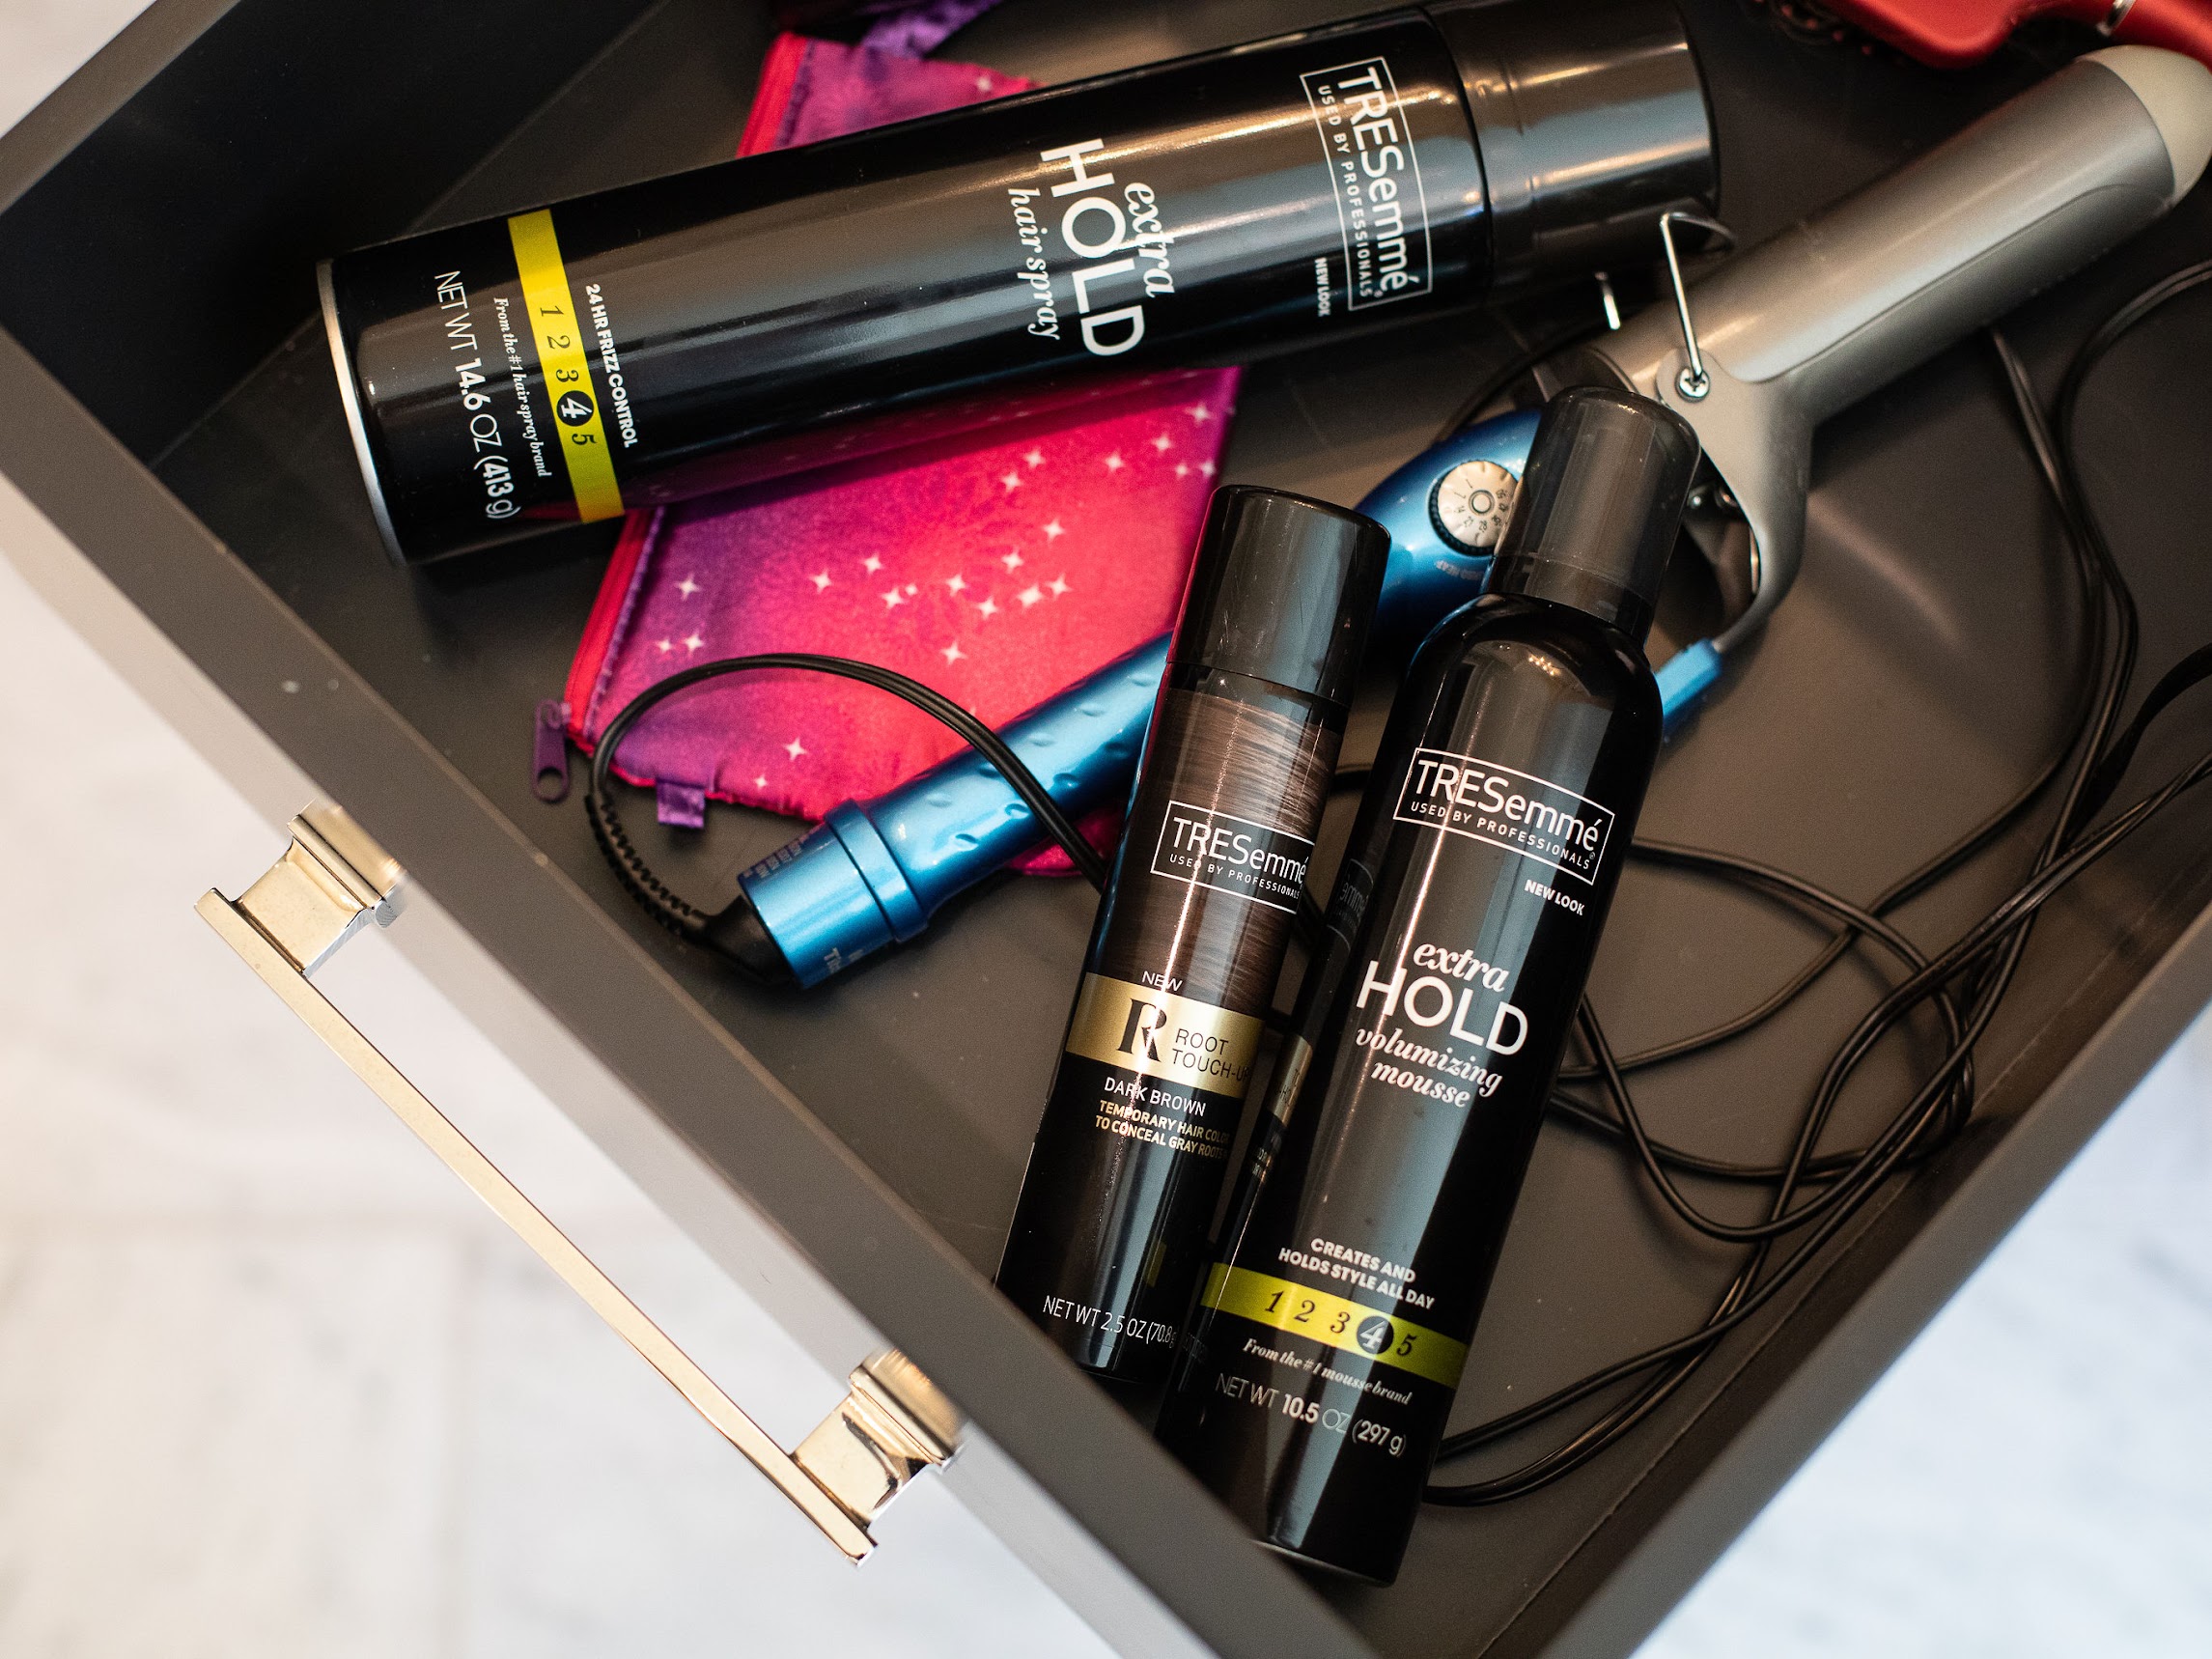 Get In Style For The Holidays With Big Savings On Your Favorite TRESemmé Styling Product on I Heart Publix